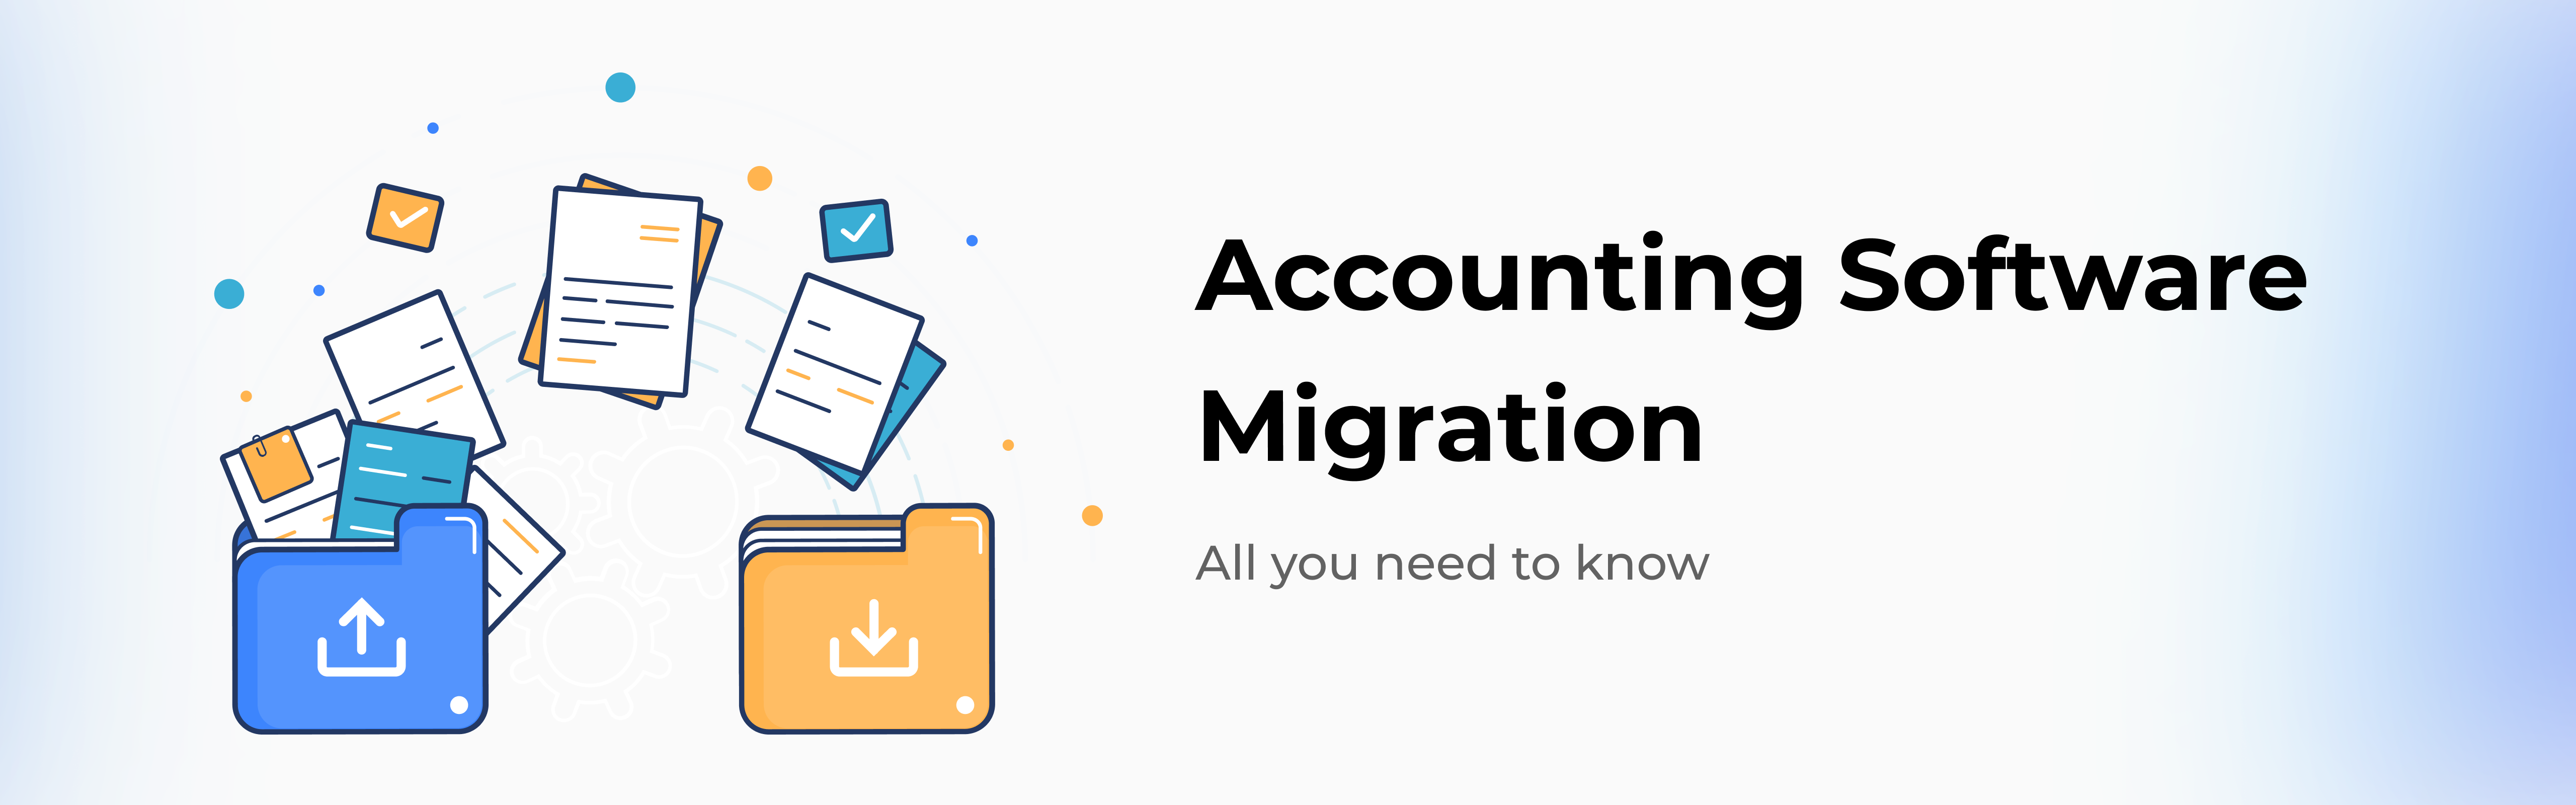 accounting-software-migration